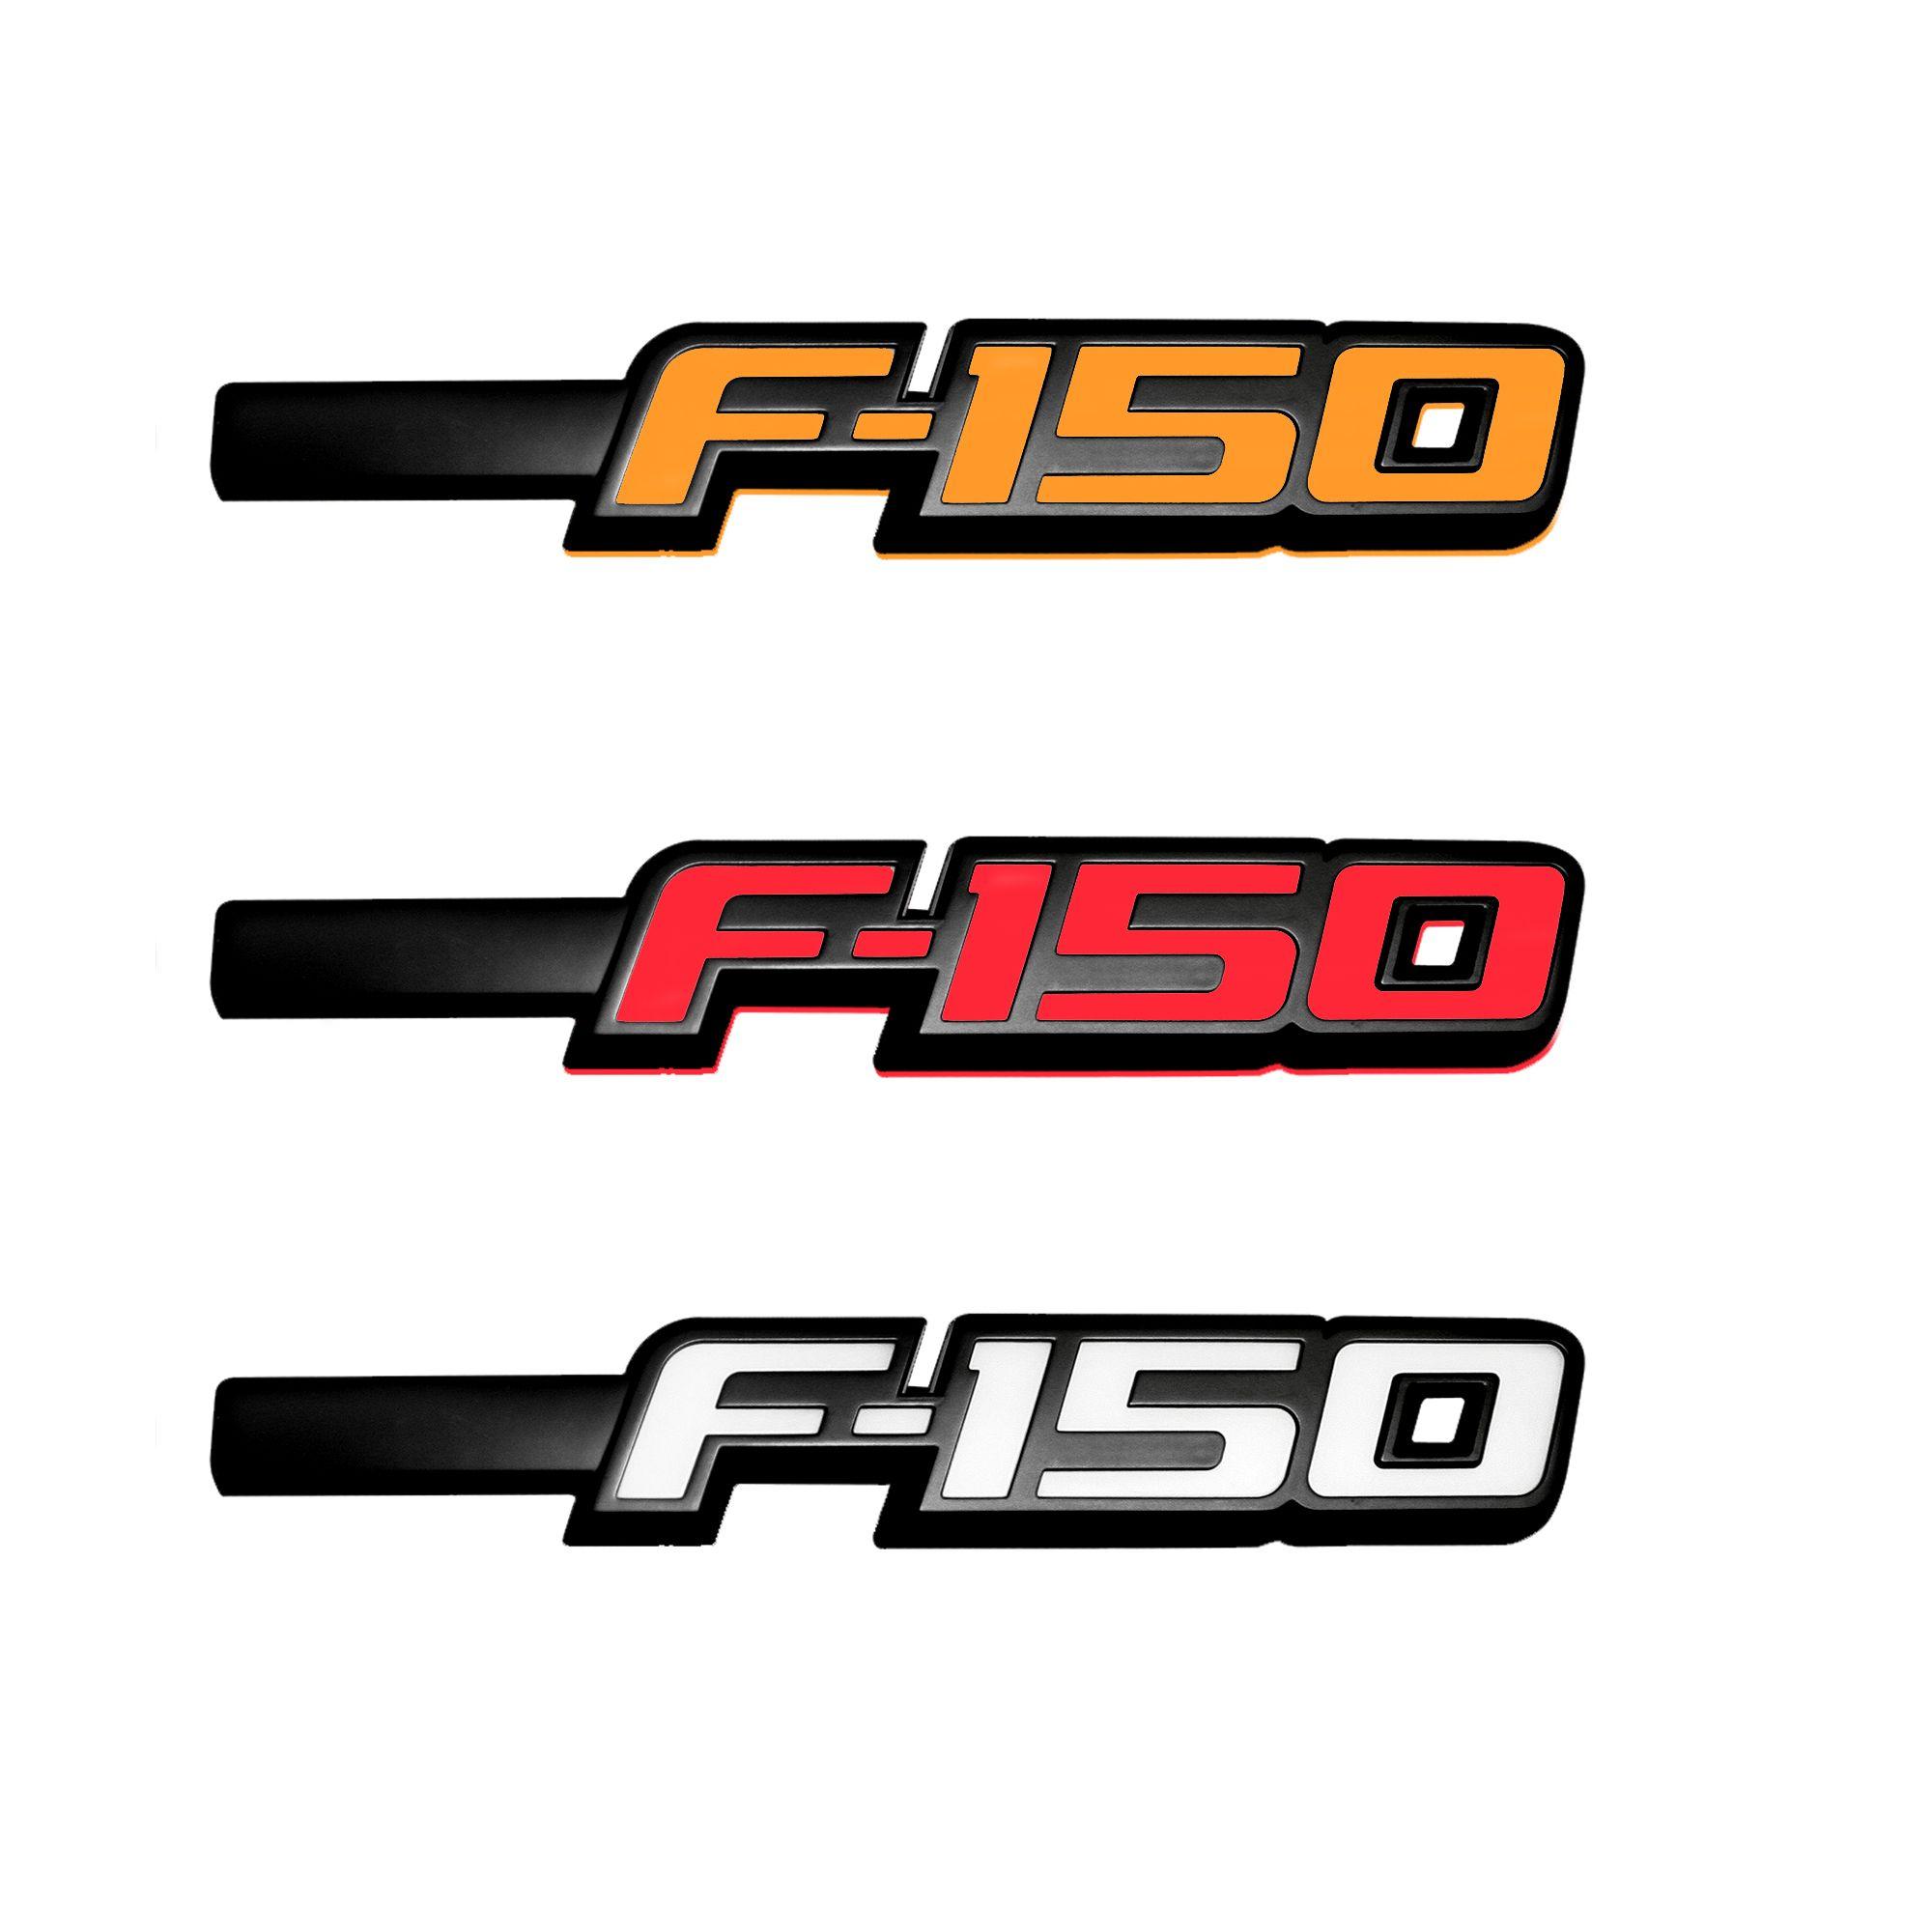 F150 Logo - RECON 264282BK 09 14 Ford F150 Illuminated Emblems 2 Piece Kit Includes Driver & Passenger Side Fender Emblems In Black Chrome In 3